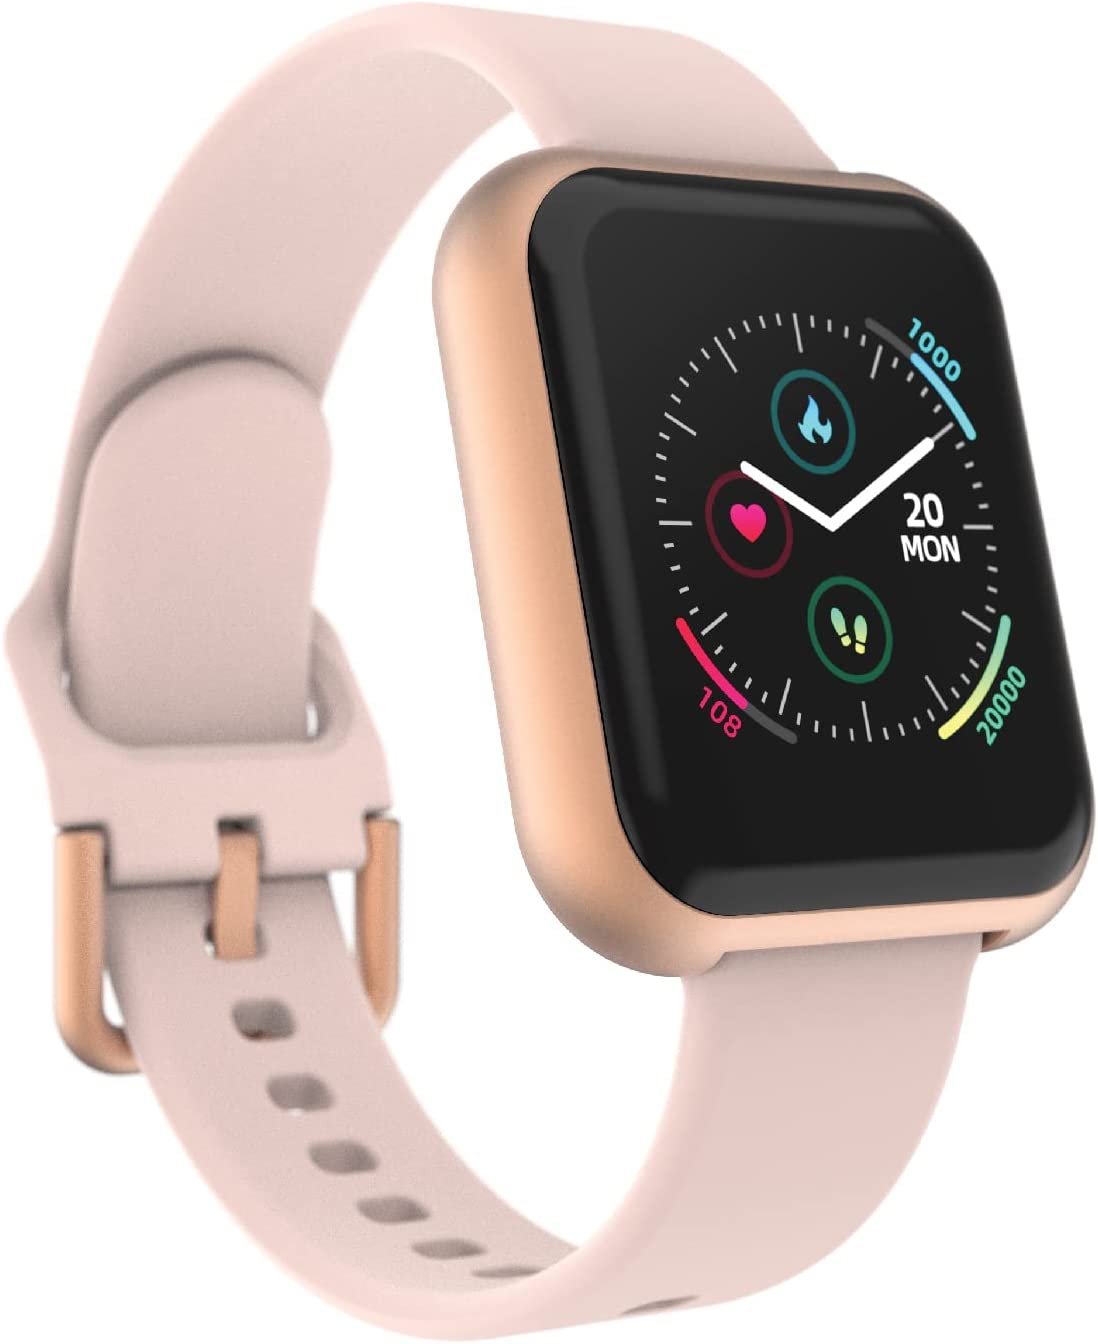 iTouch Air 3 Smartwatch in Rose Gold with Pink Strap